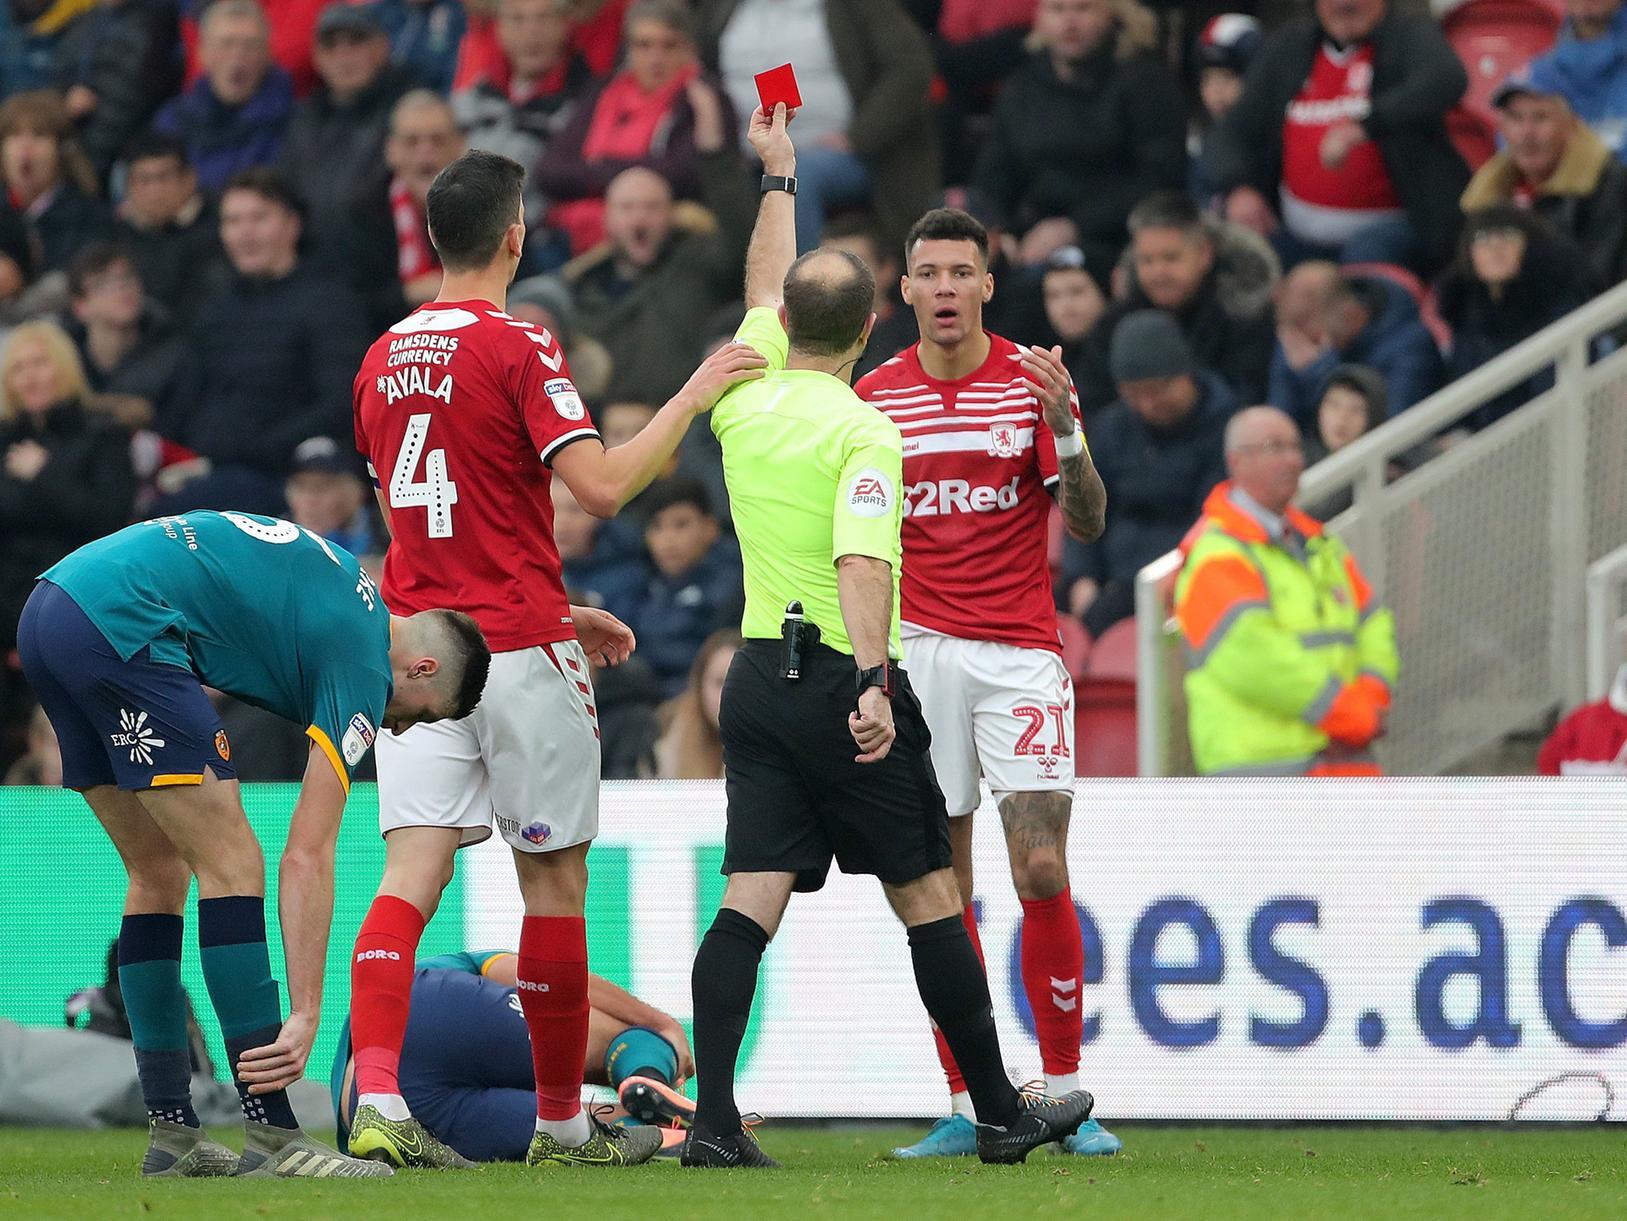 Boro boss Jonathan Woodgate left Johnson to hang out to dry after the wingers red card against Hull City. The Teessiders were 2-0 up at the time before a Jarrod Bowen double earned Grant McCanns side a point.